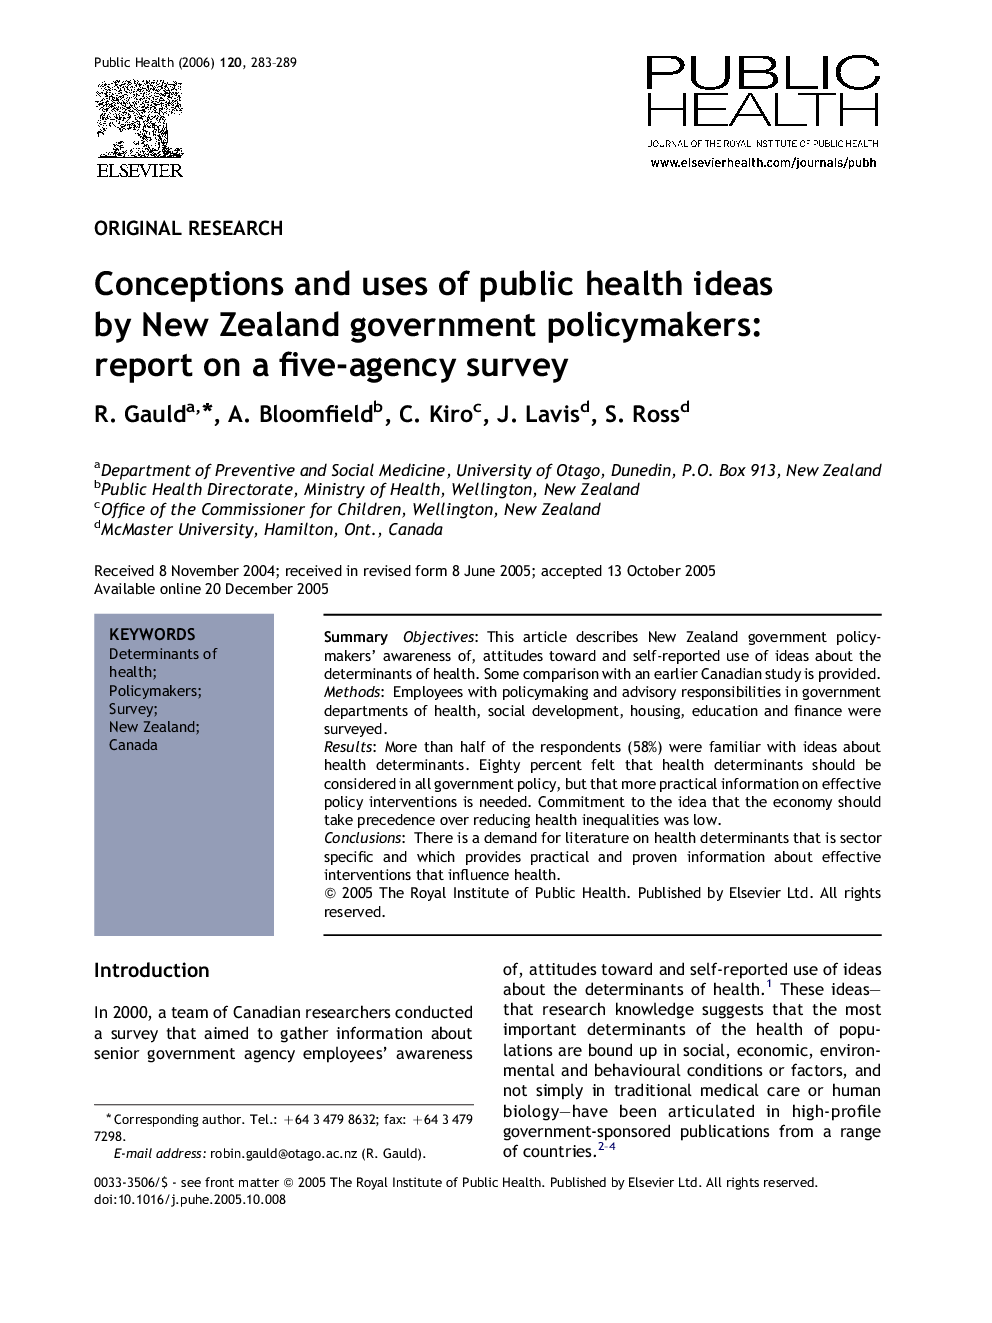 Conceptions and uses of public health ideas by New Zealand government policymakers: report on a five-agency survey